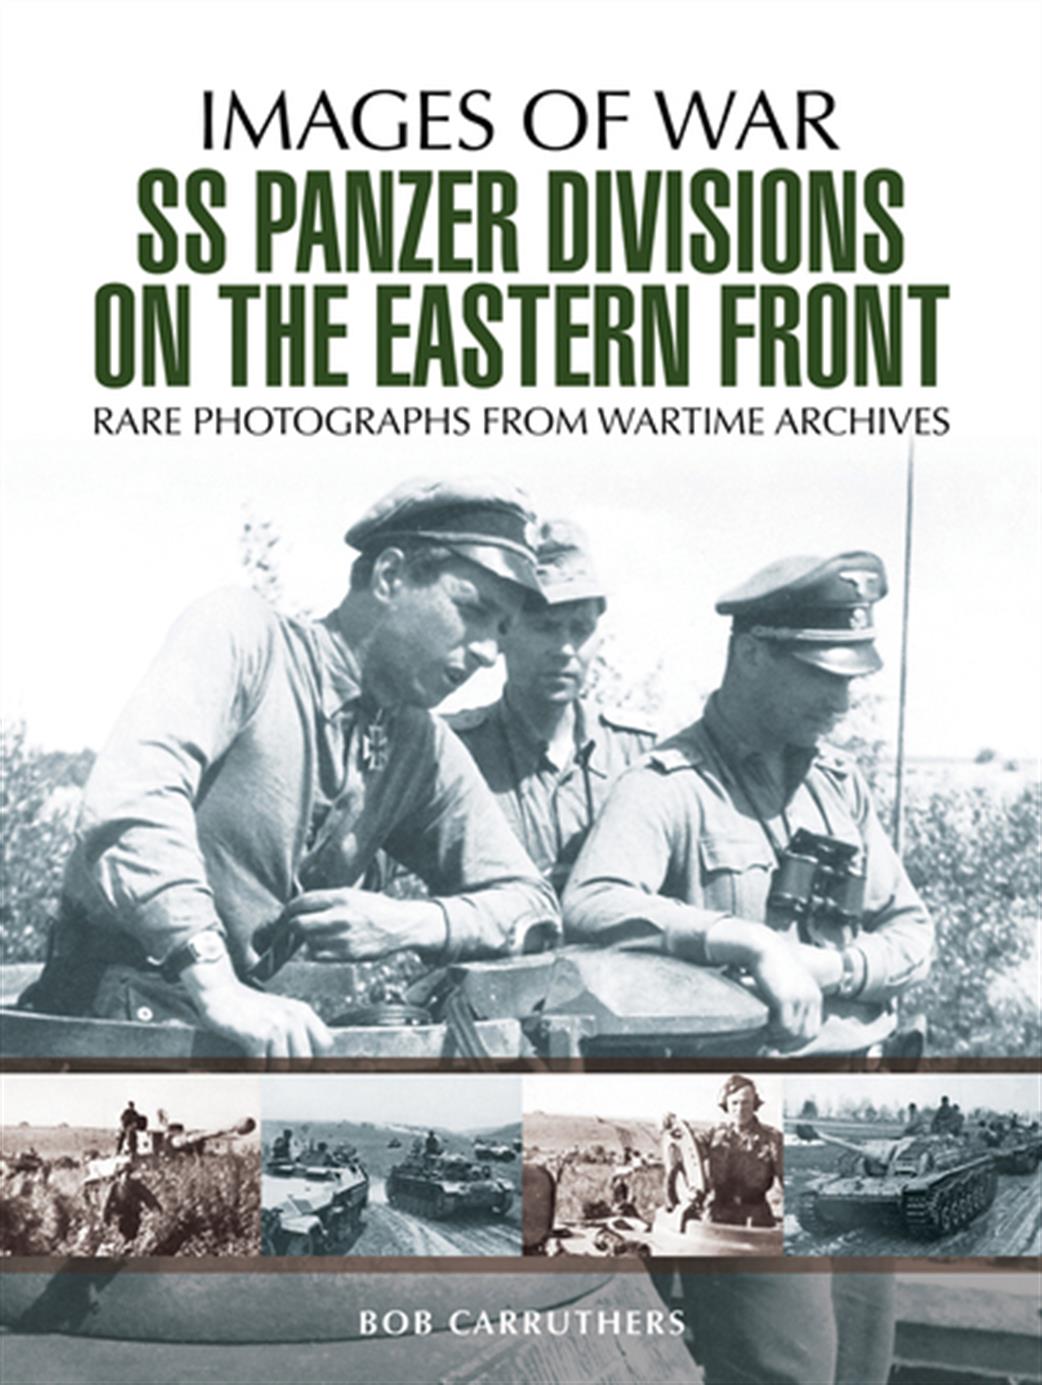 Pen & Sword  9781473868403 Images of War SS Panzer Divisions on the Eastern Front book by  Bob Carruthers